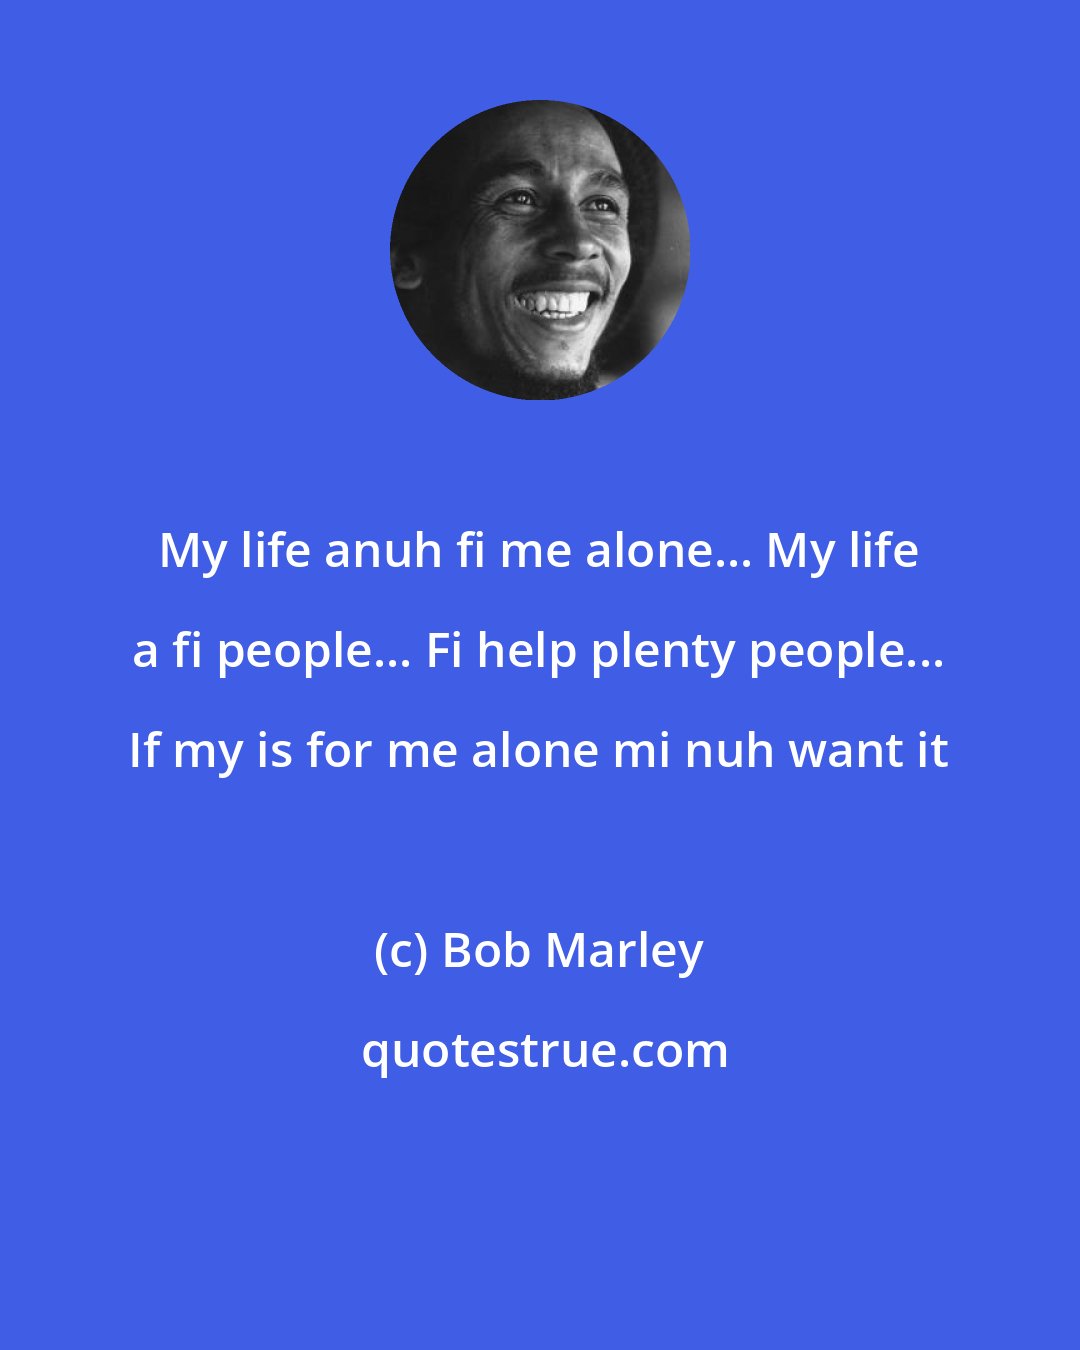 Bob Marley: My life anuh fi me alone... My life a fi people... Fi help plenty people... If my is for me alone mi nuh want it